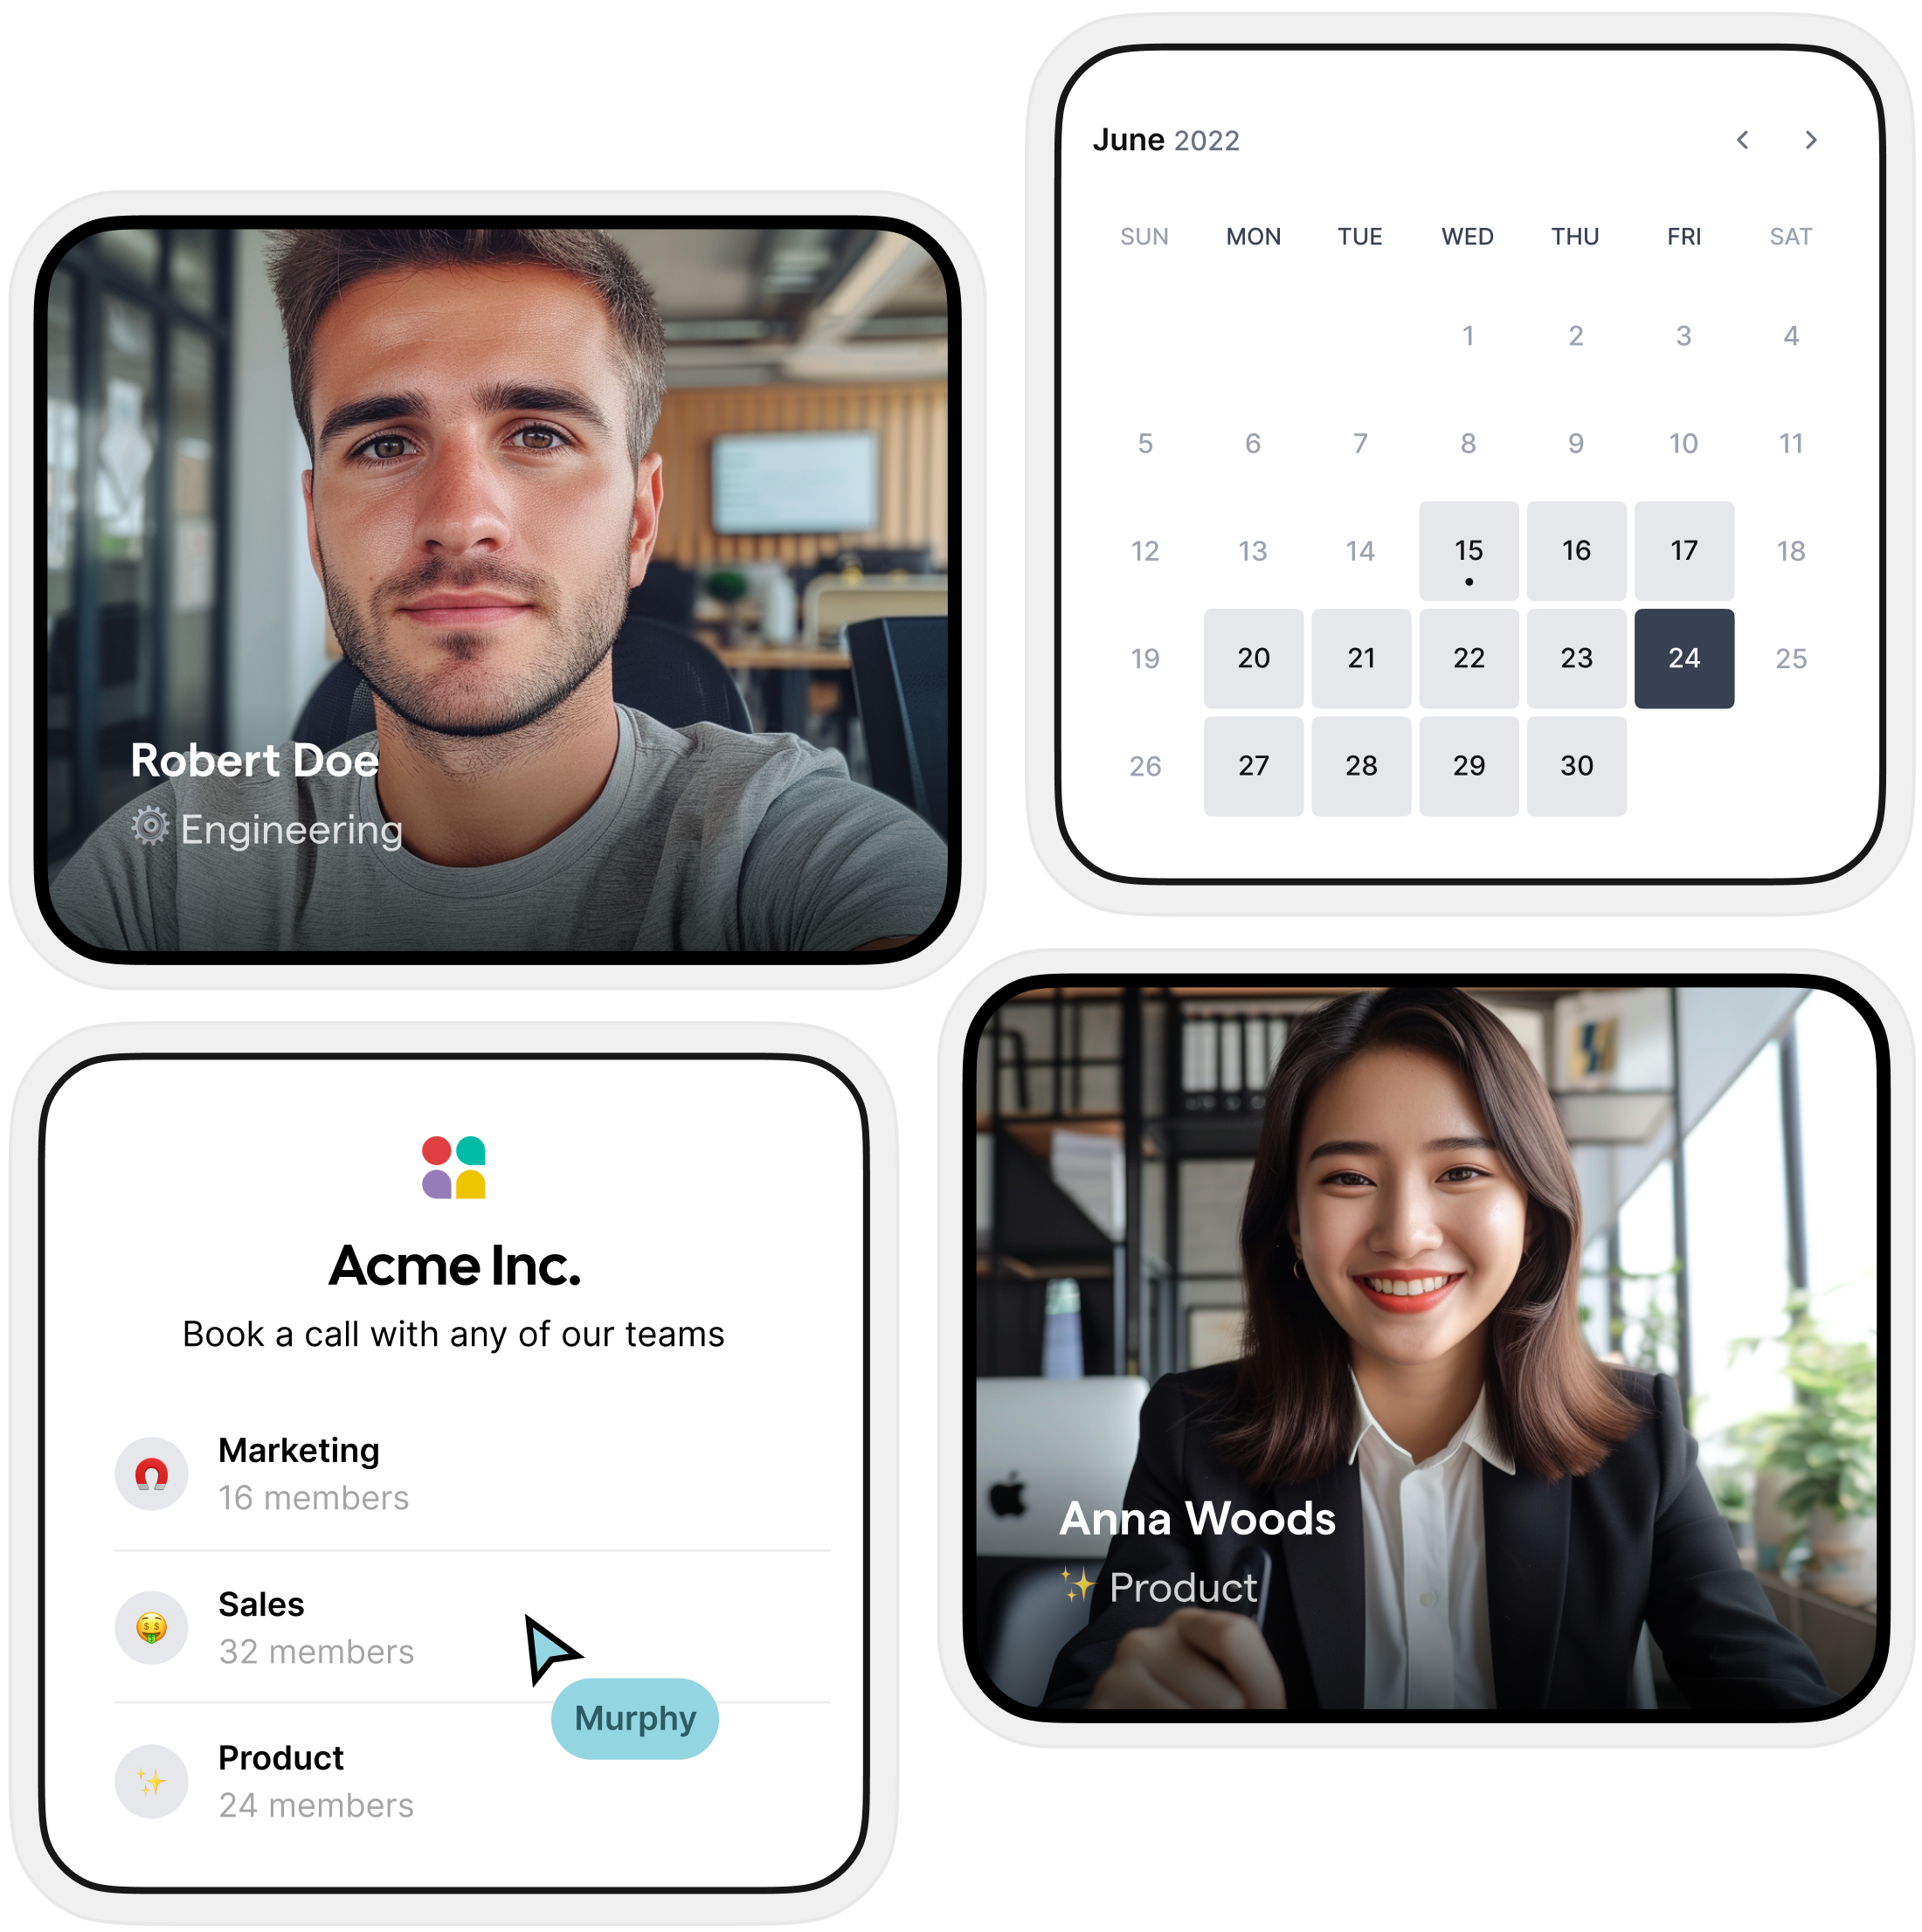 Two employees of Acme Inc. share a bookable calendar